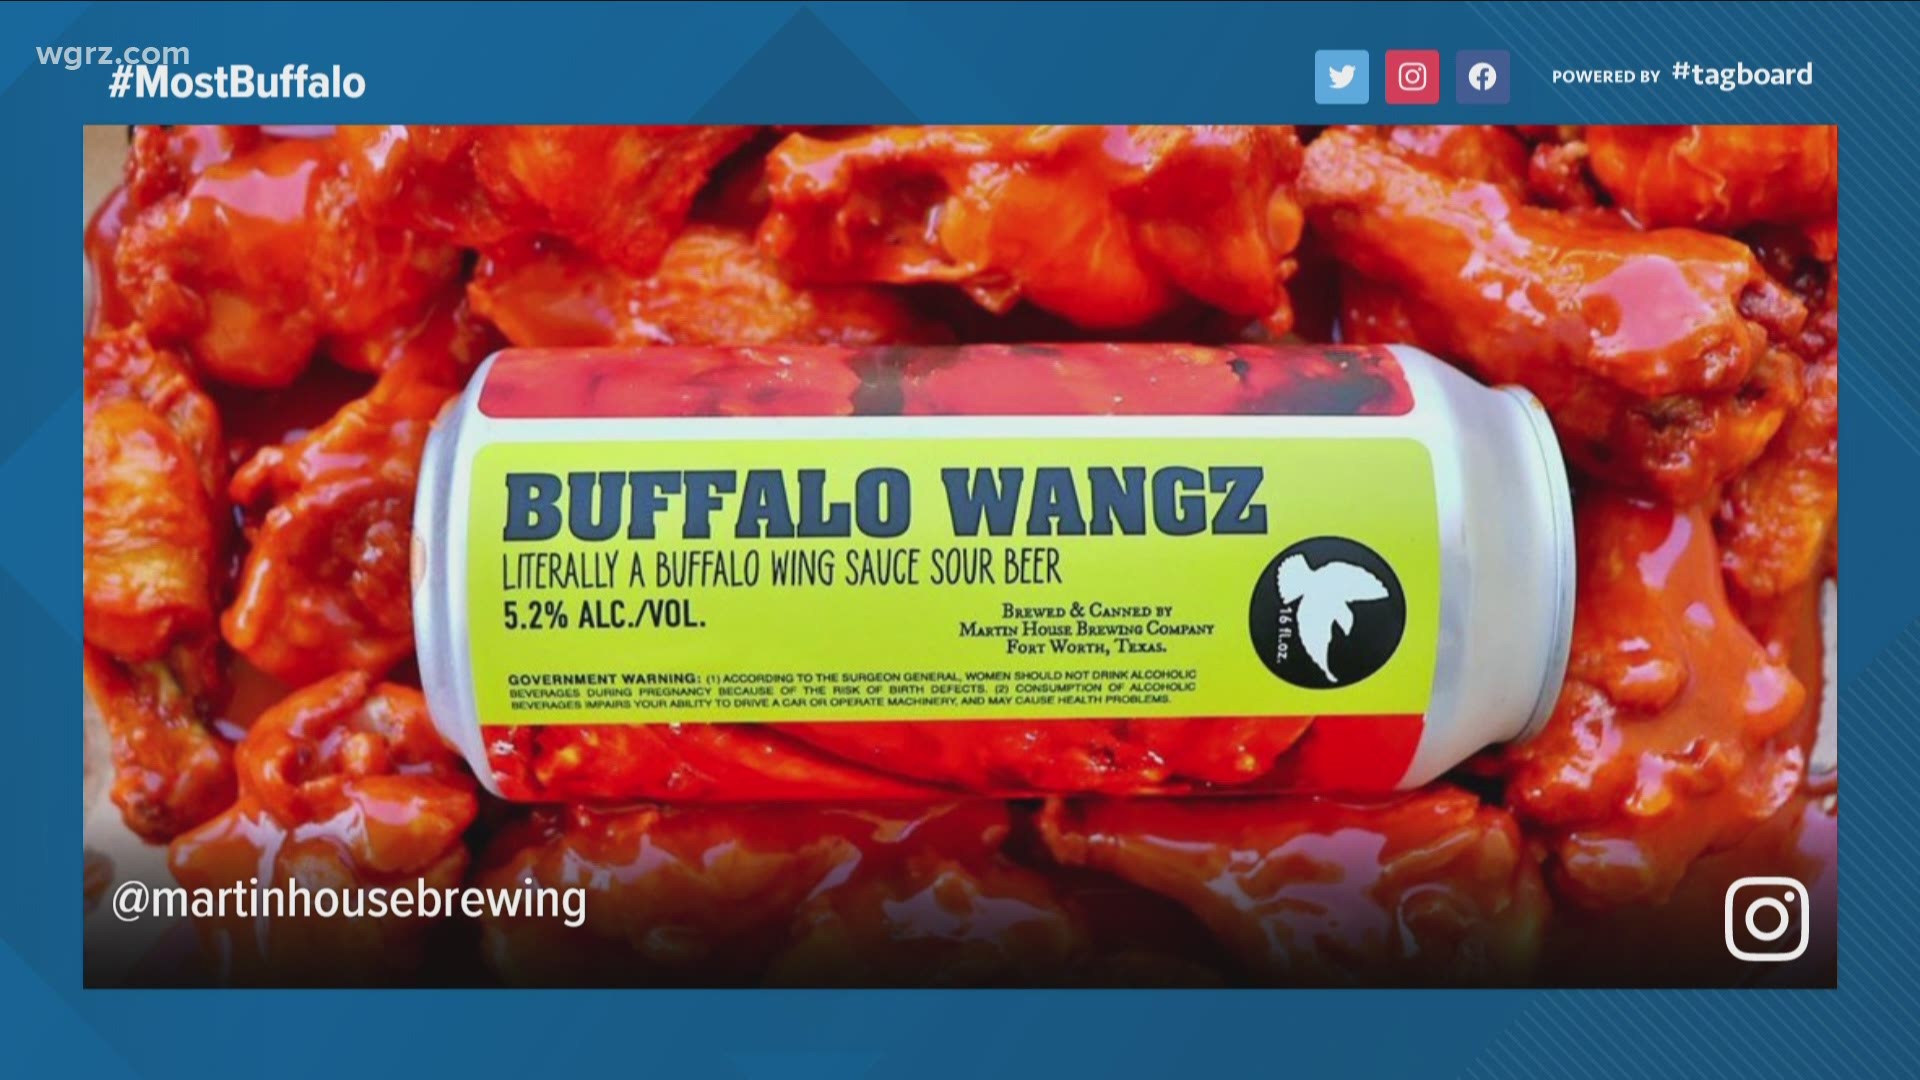 Brewery in Texas makes 'chicken wangz' beer